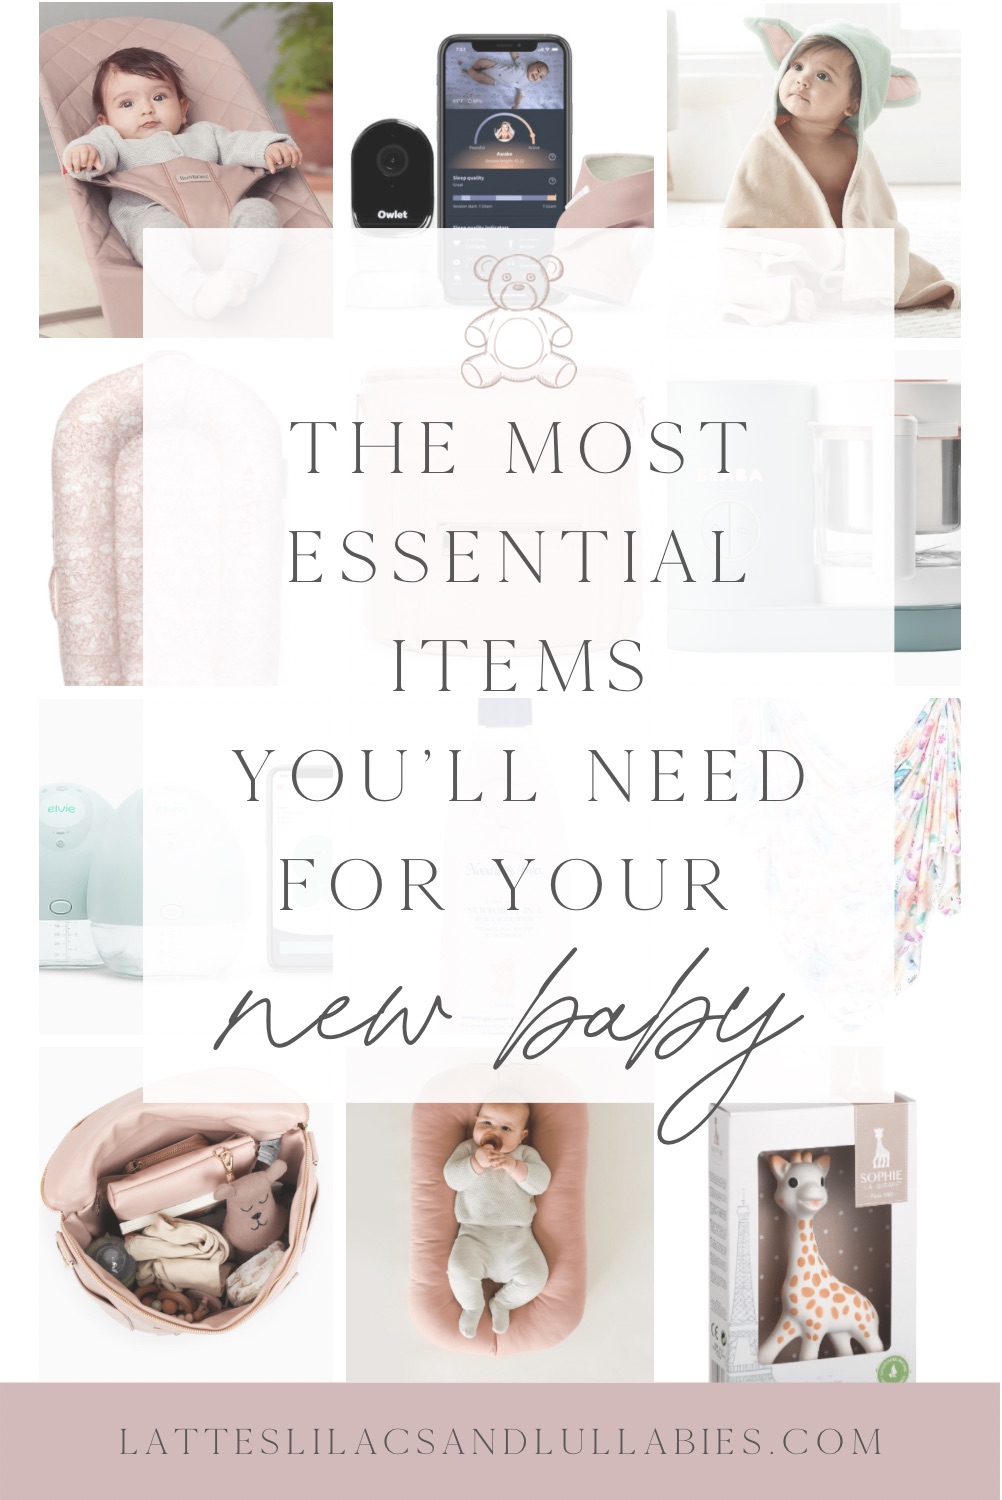 The Ultimate Guide to Baby Essentials: What New Parents Need in the First 3 Months